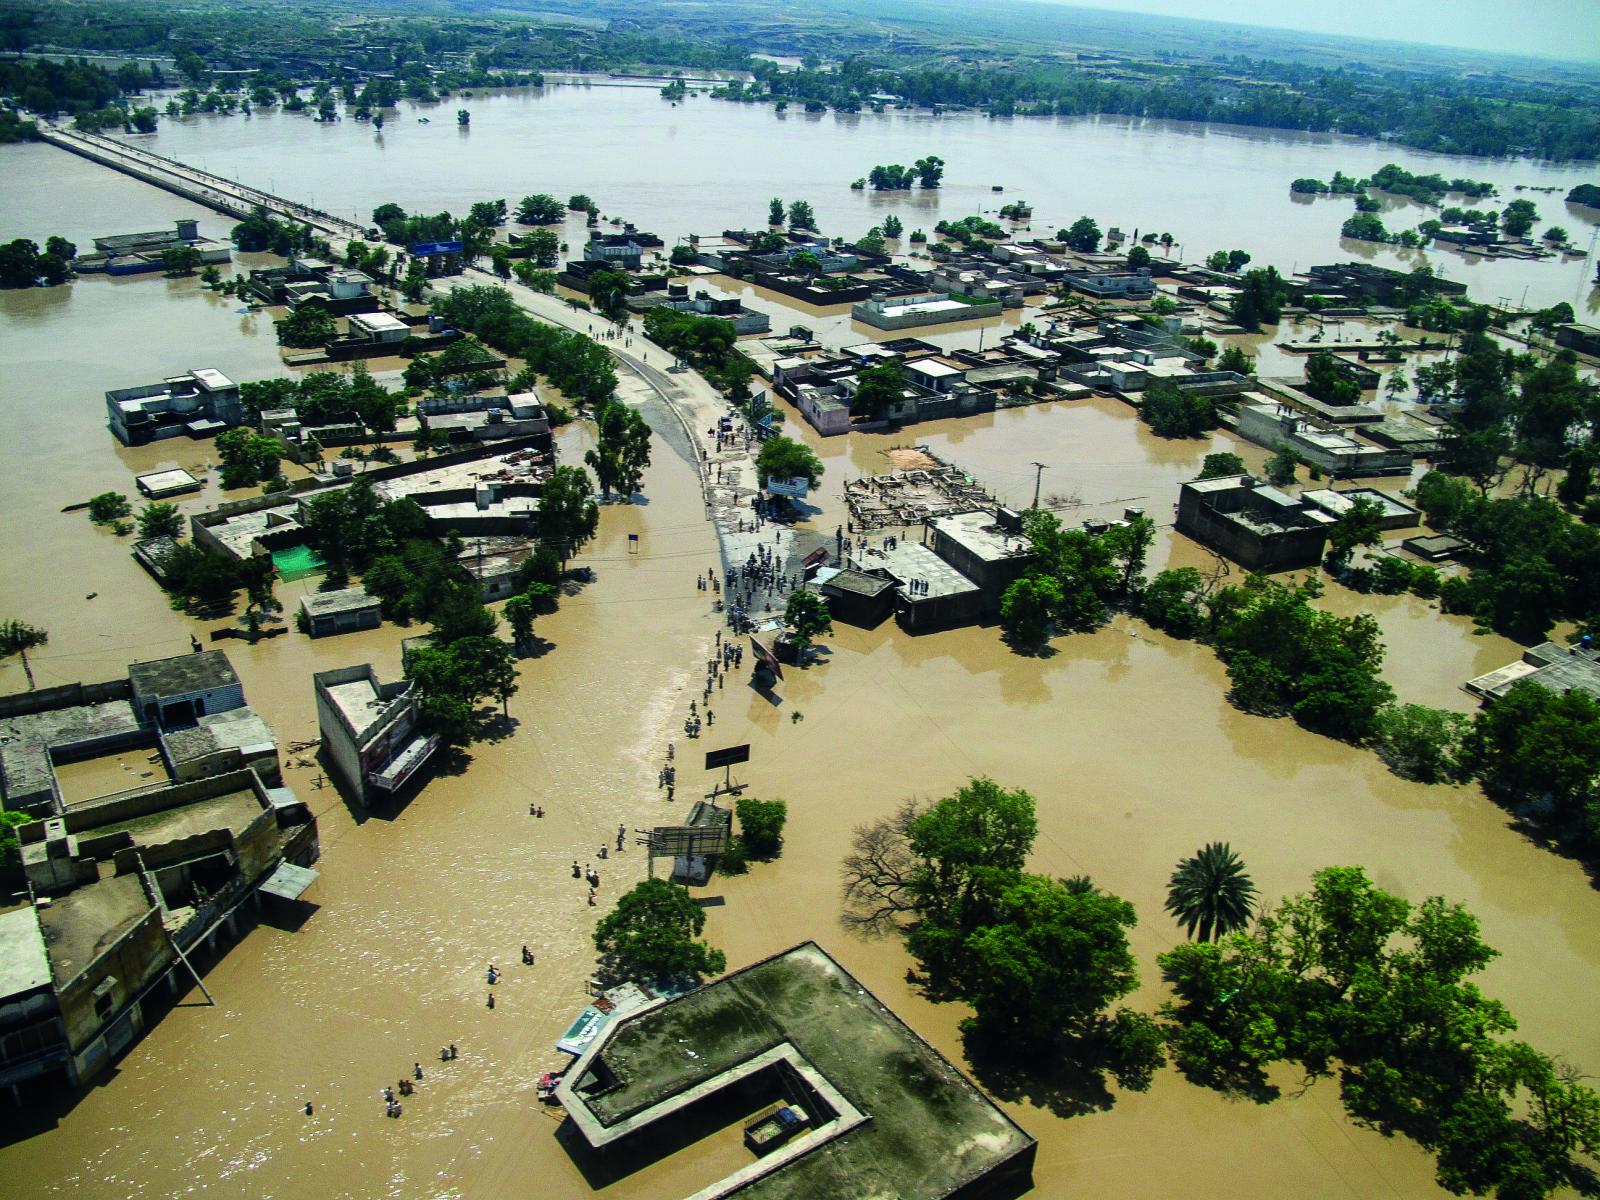 Aerial shot of flooding in Pakistan